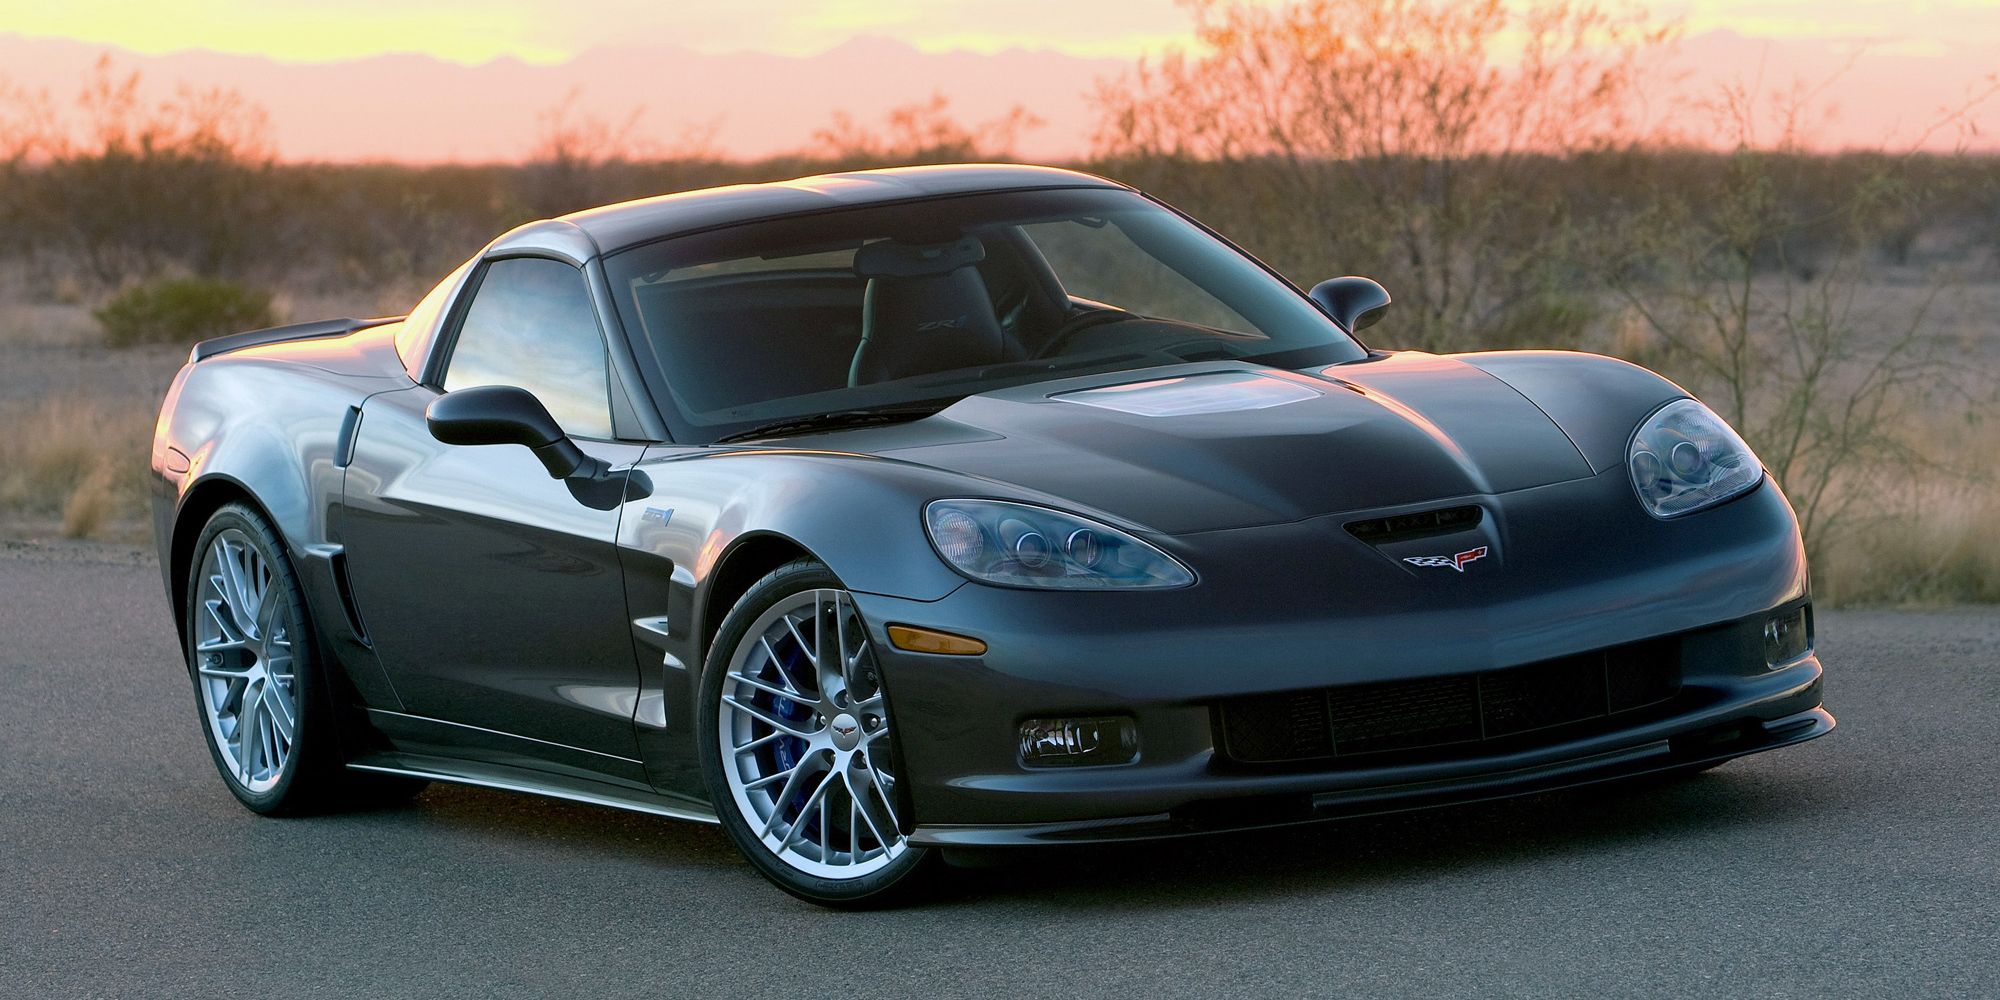 The front of the Corvette ZR1